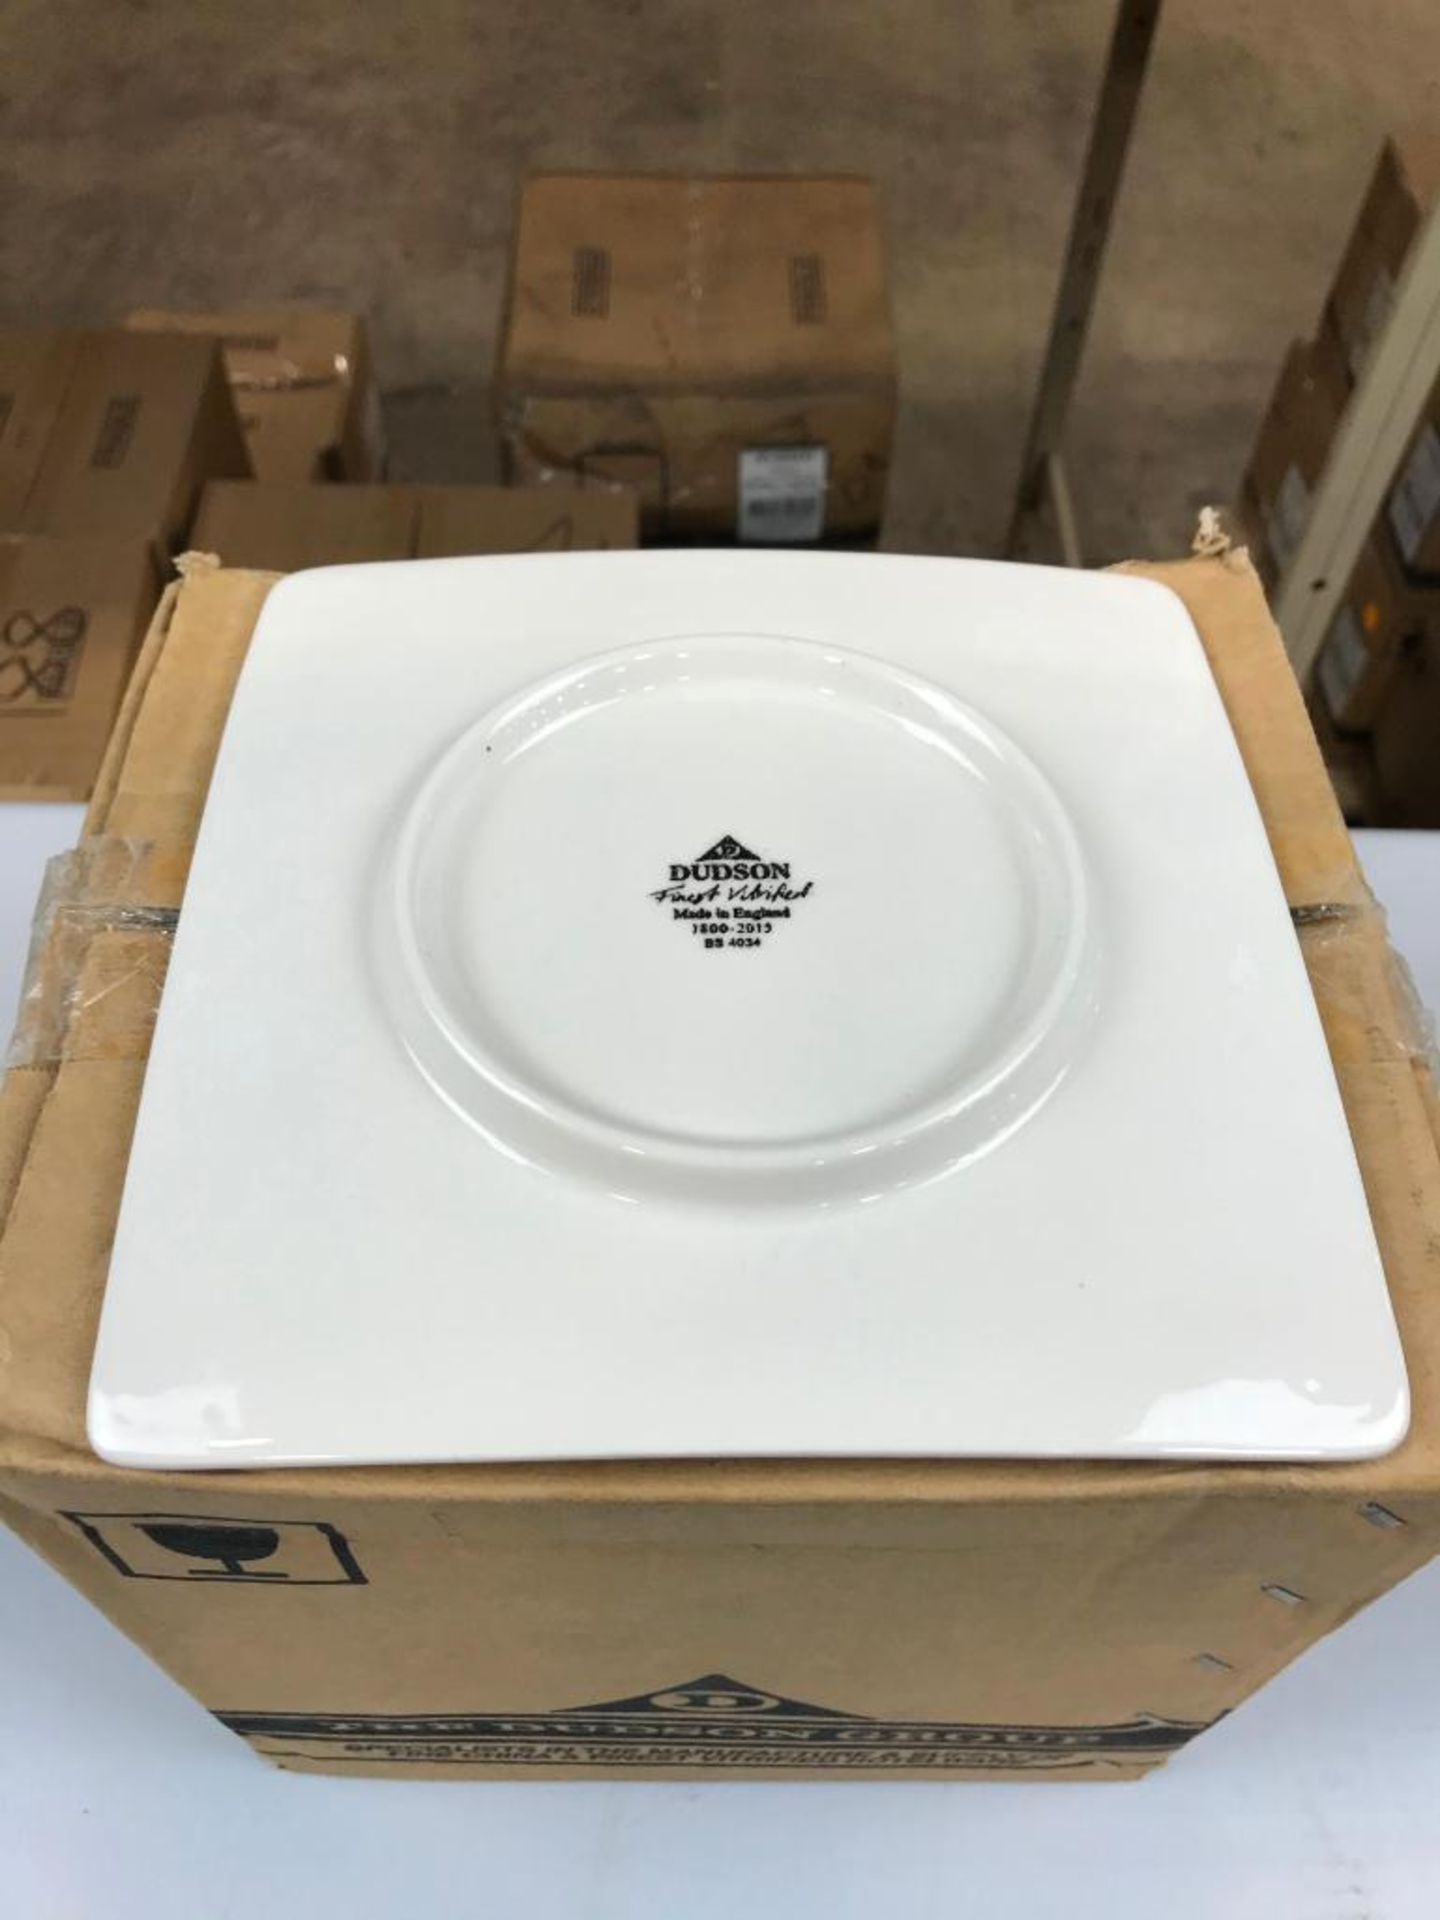 DUDSON GEOMETRIX SQUARE PLATE 7.5" - 12/CASE, MADE IN ENGLAND - Image 2 of 4